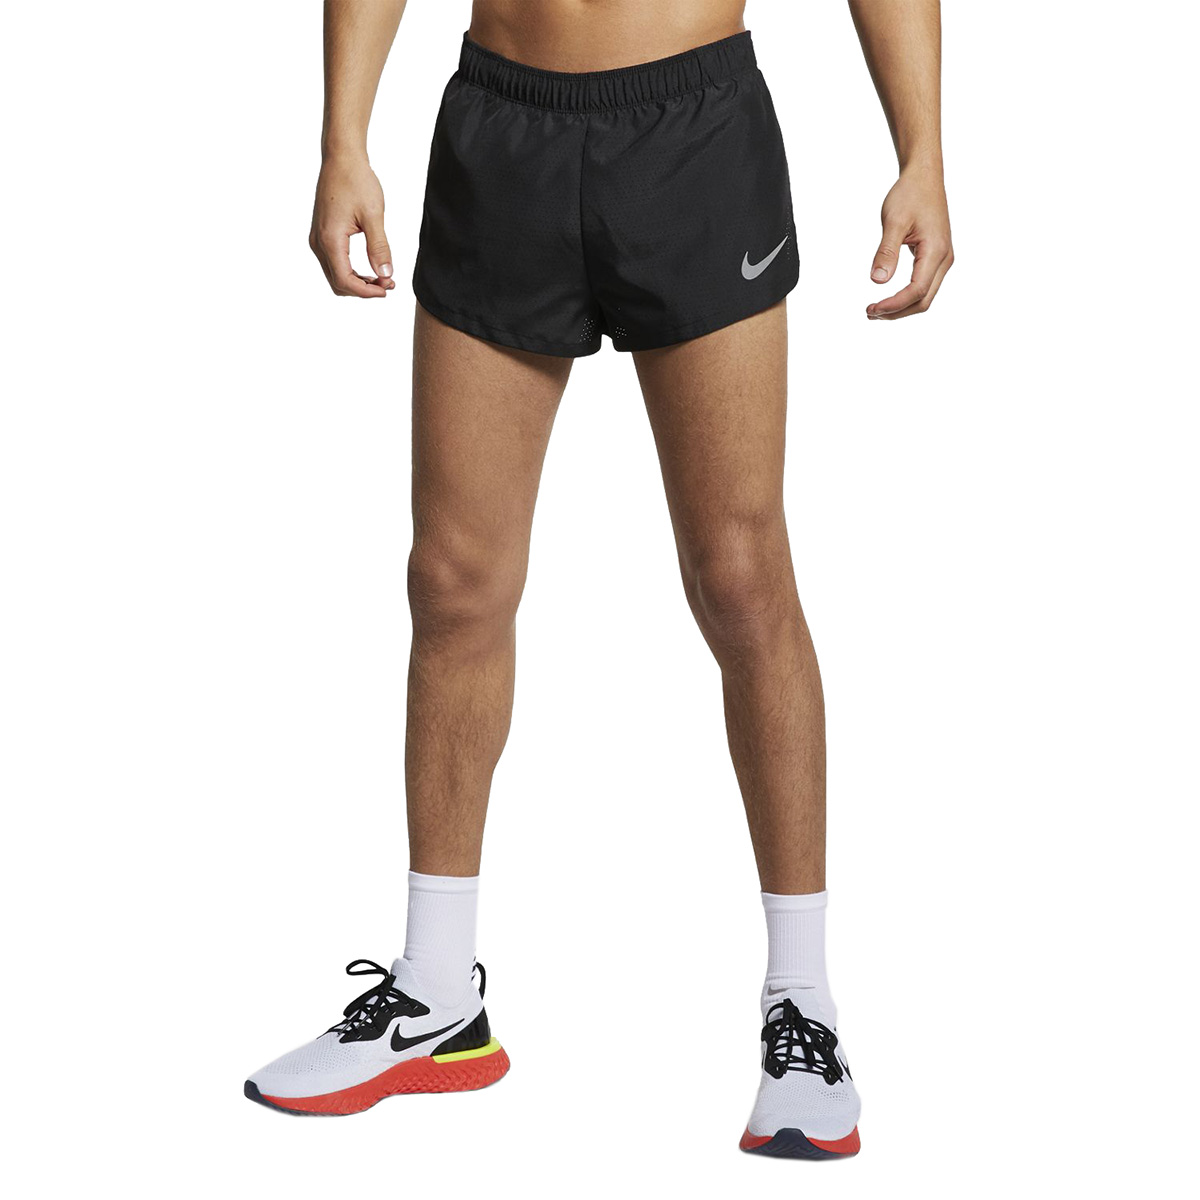 Nike 2" Fast Dry Short, , large image number null